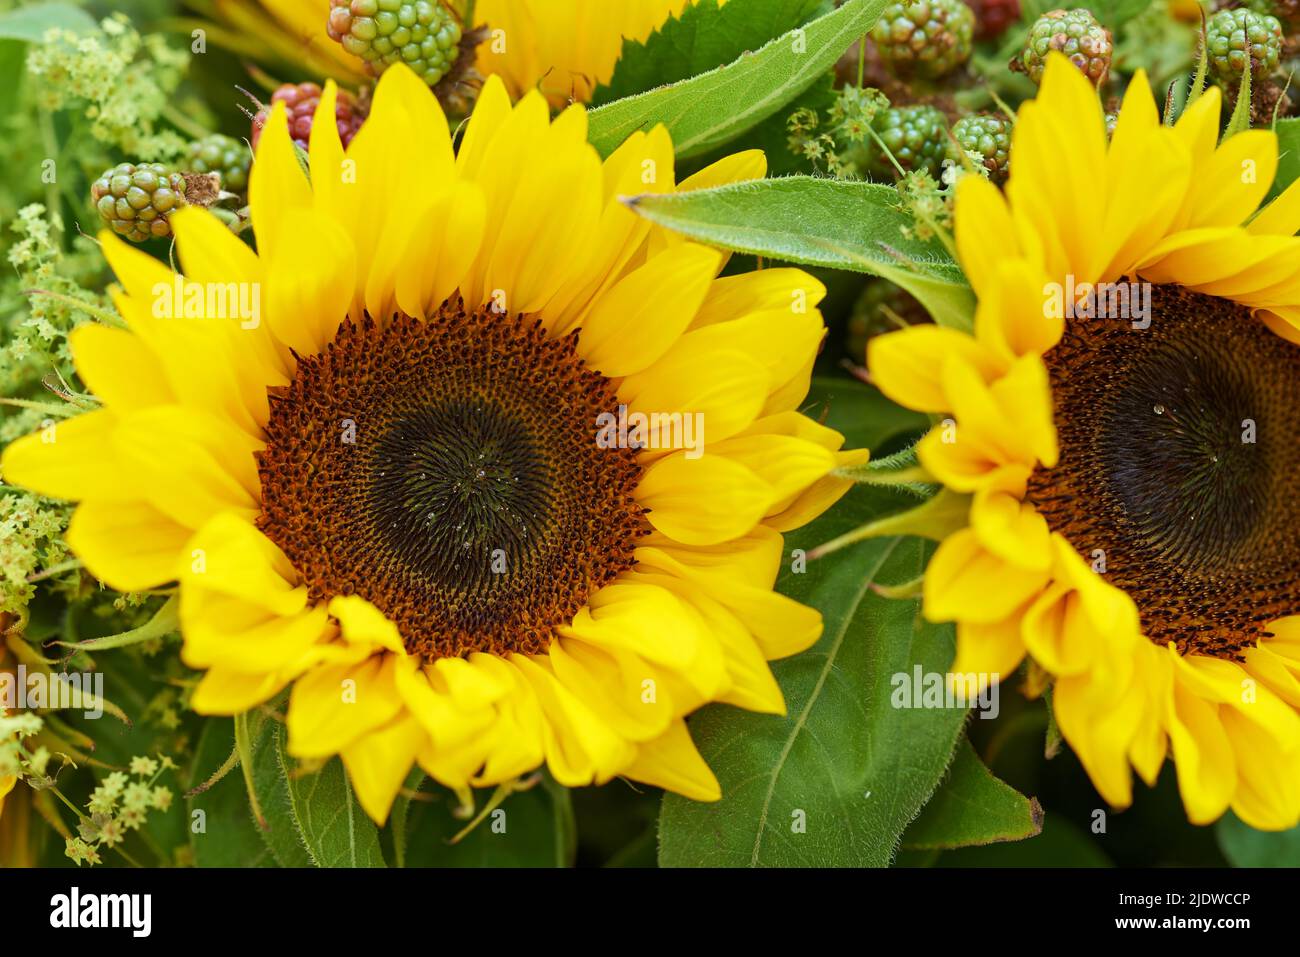 Closeup of a yellow sunflower bouquet. Two large bright sunflowers in a farm style floral arrangement with green leaves and petals. Rustic rural Stock Photo